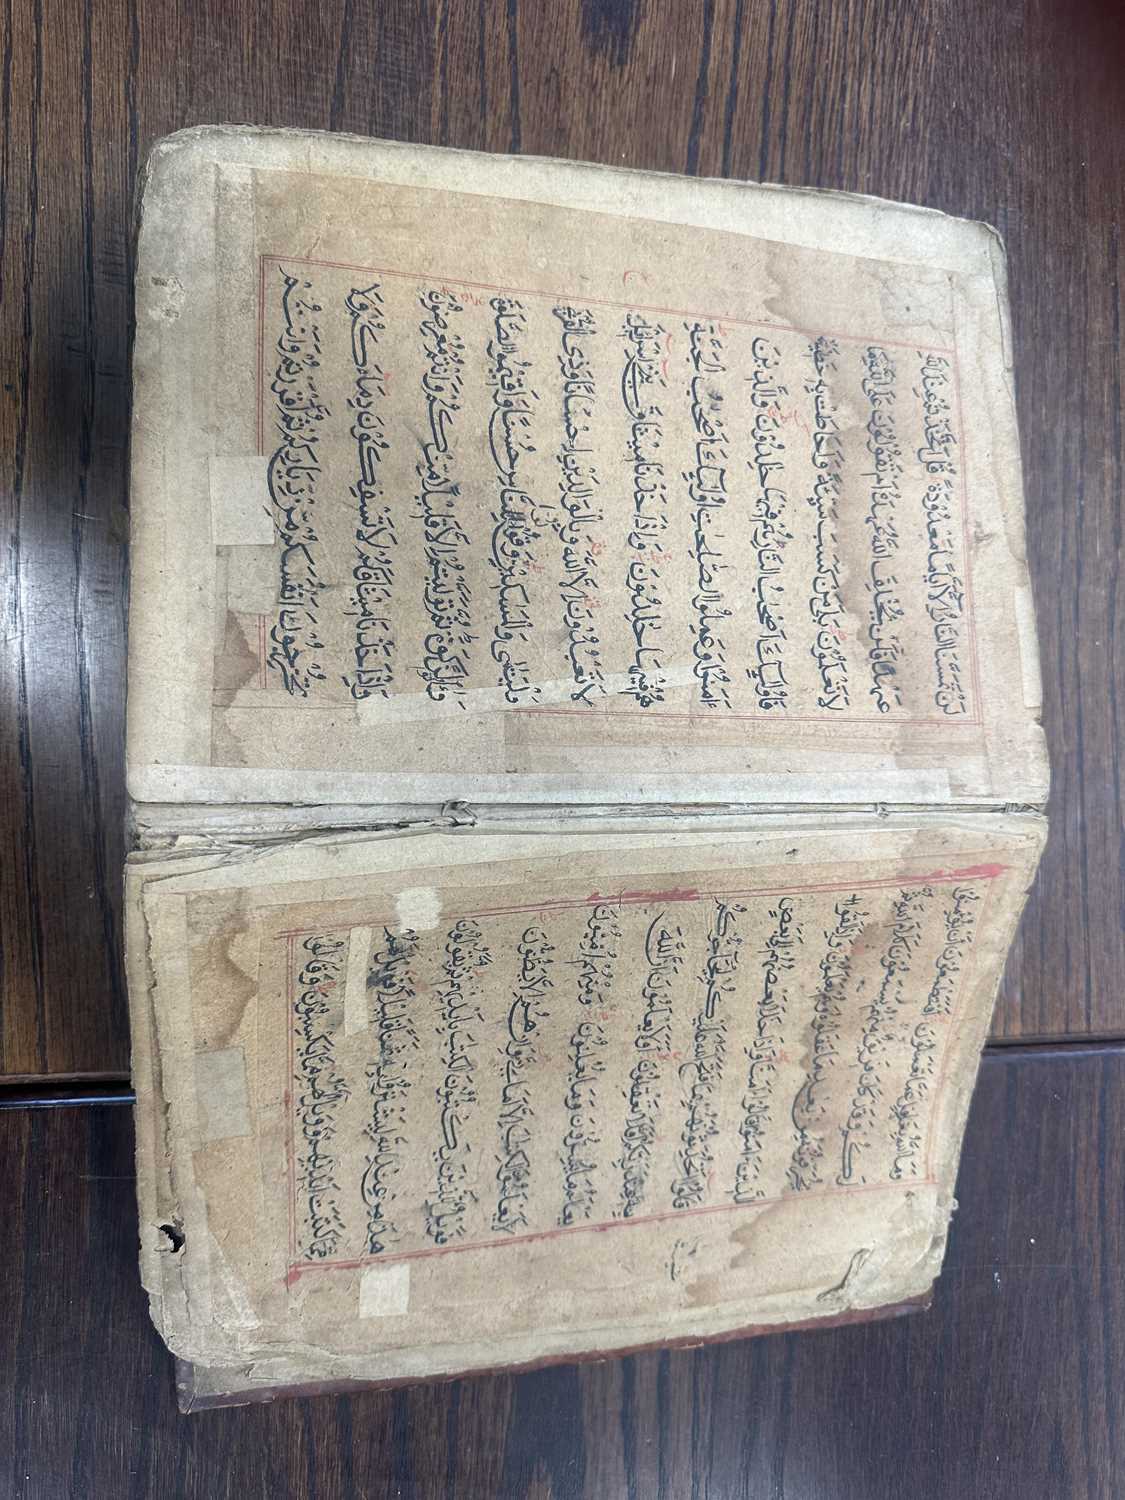 AN EARLY COPY OF THE KORAN LEATHER BOUND BOOK - Image 41 of 44